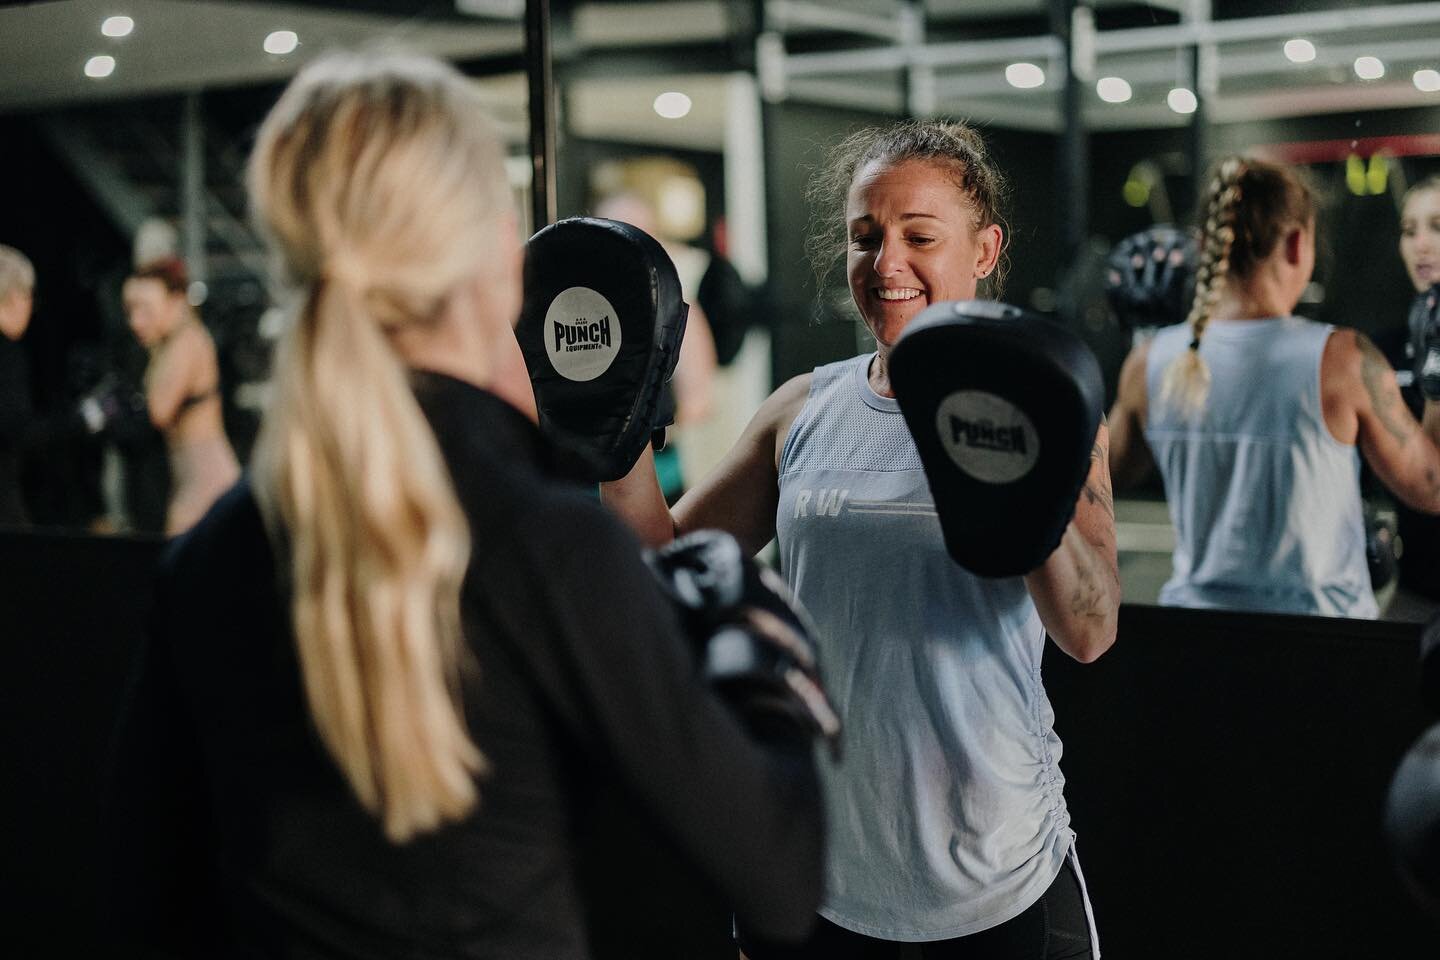 Gym anxiety:

I&rsquo;m sure we have all experienced the same feeling of walking into a gym and thinking to yourself &ldquo;sh*t I&rsquo;m so nervous, what do I do, everyone is going to be looking at me&rdquo;. 

Let me tell YOU,  that no one is payi